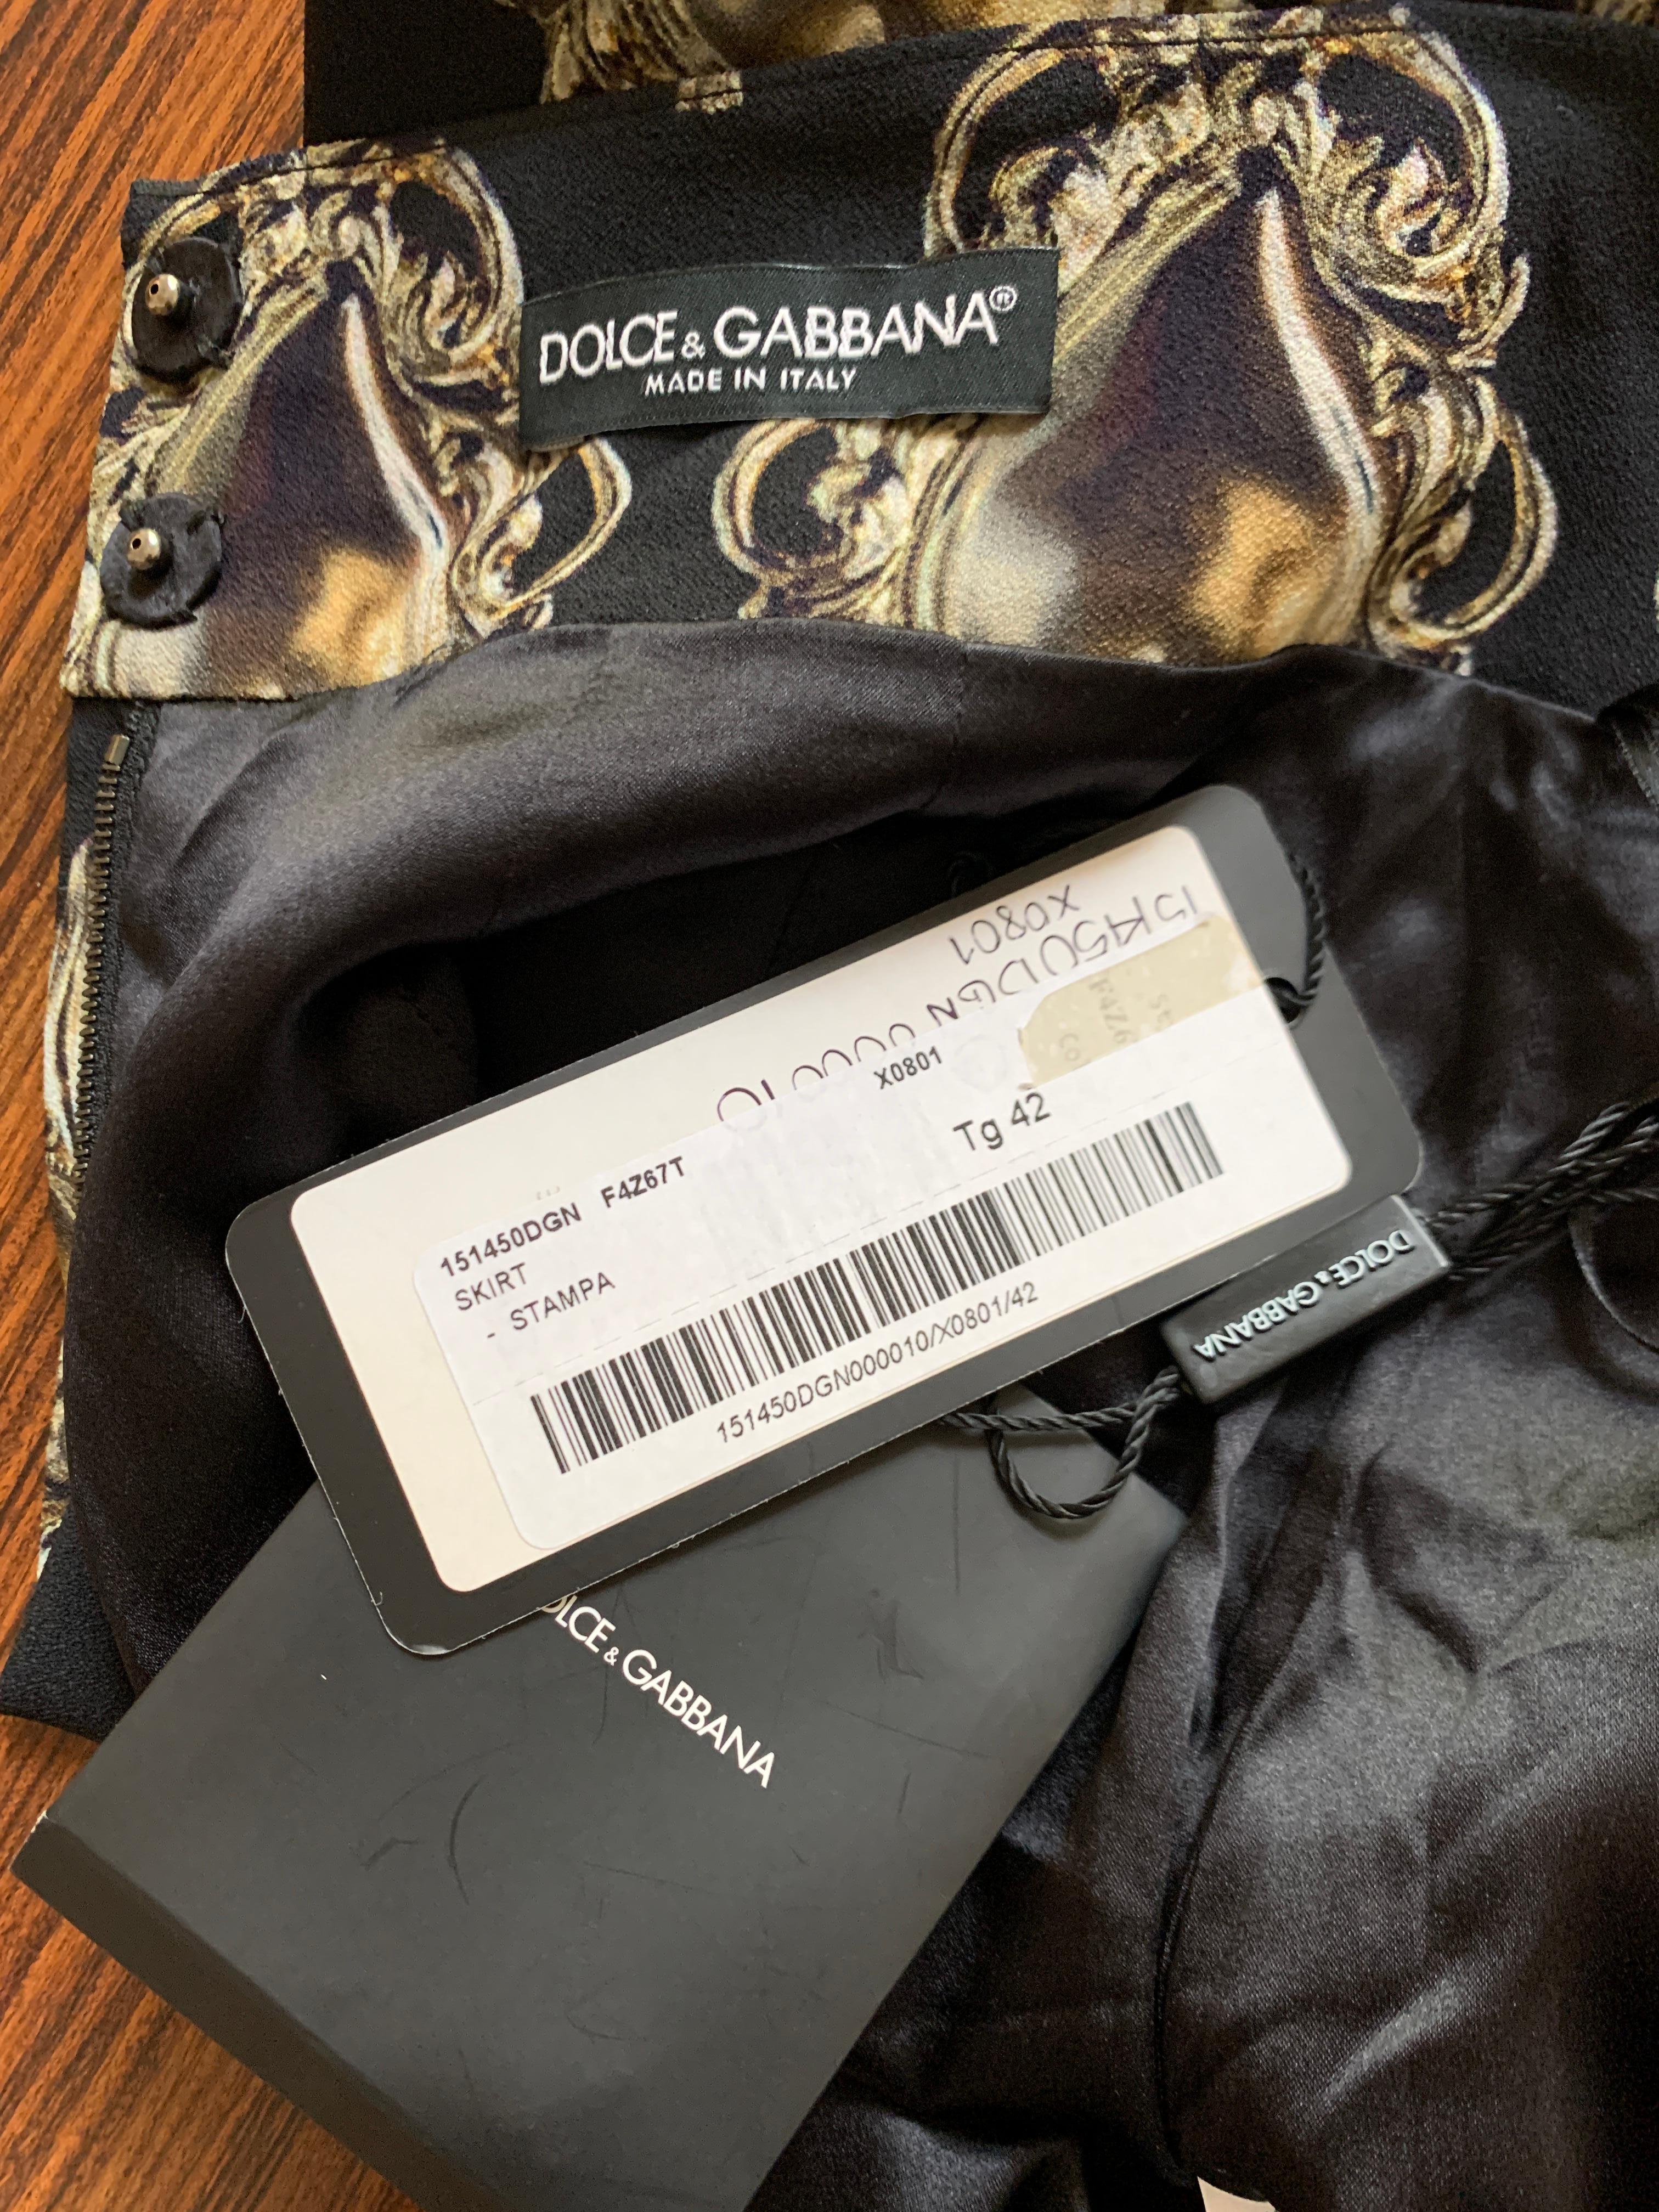 New 2015 Dolce & Gabbana Sacred Heart Print Pencil Skirt in Black and Gold 2